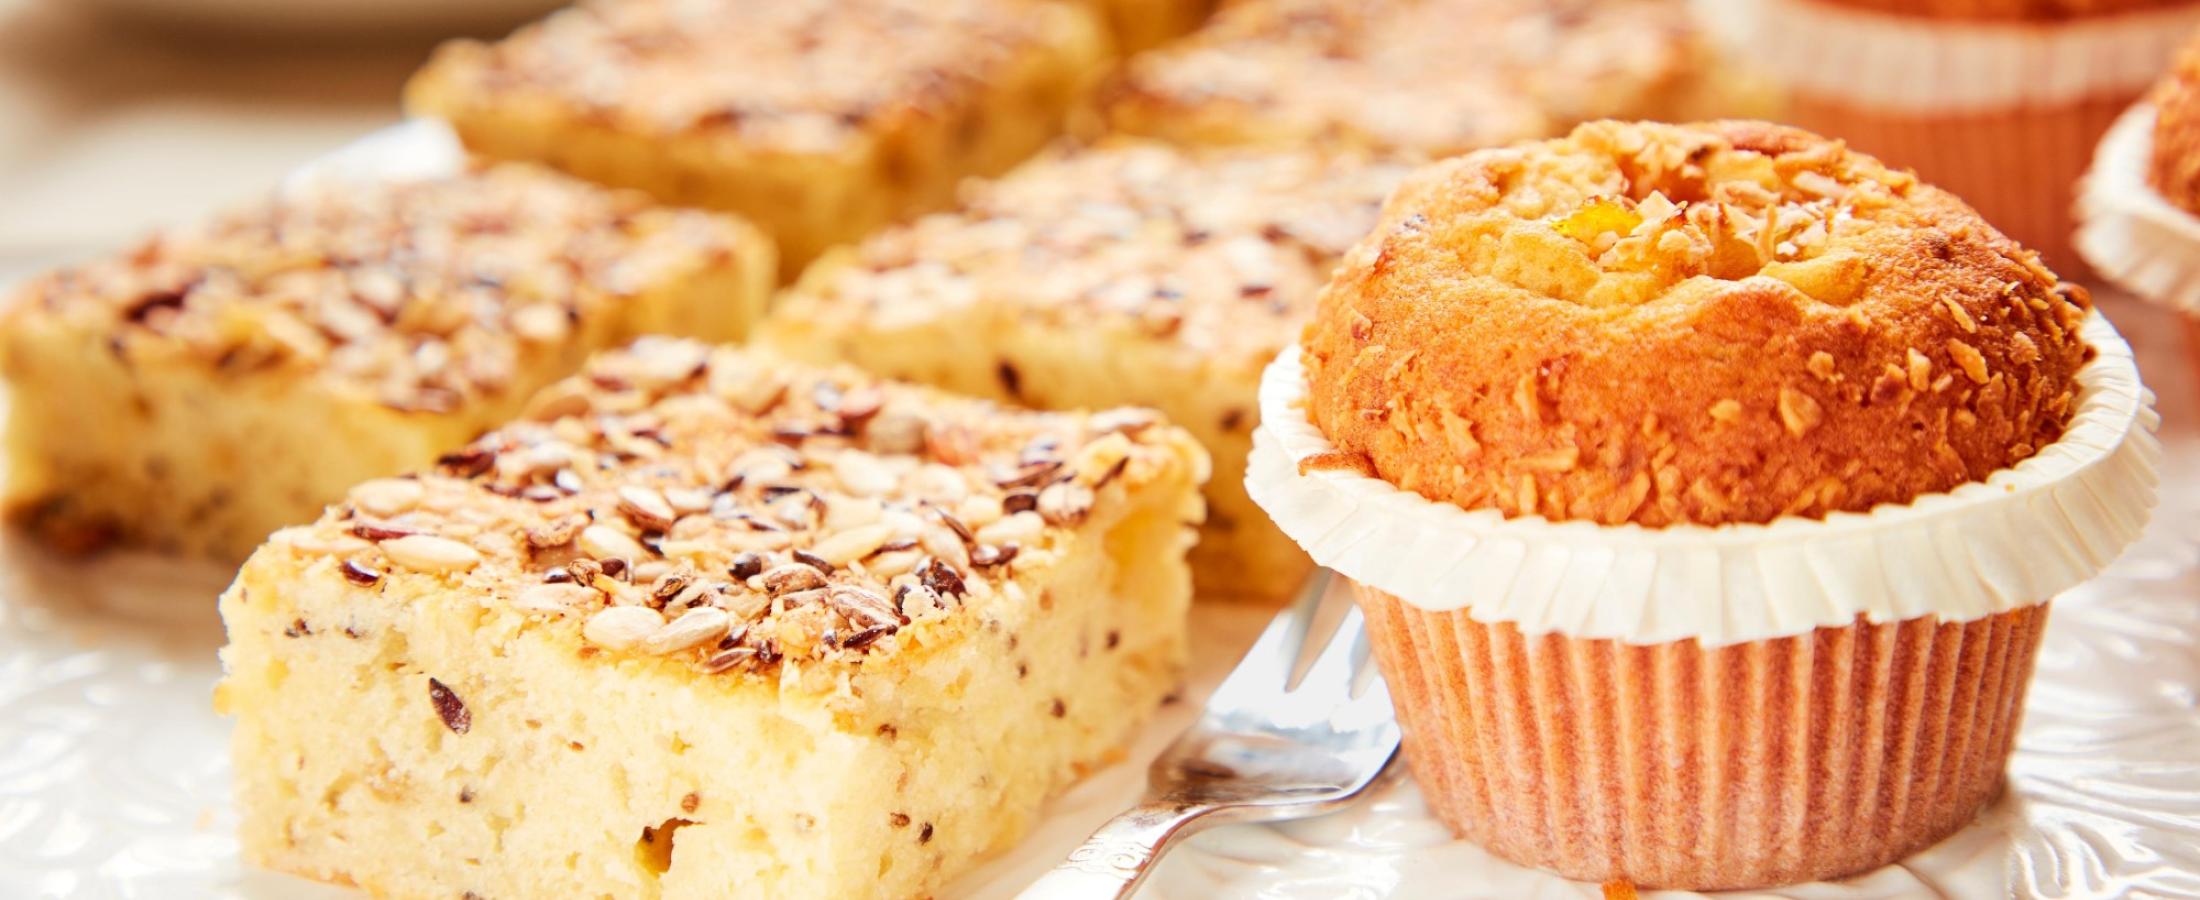 pastry mixes - muffins